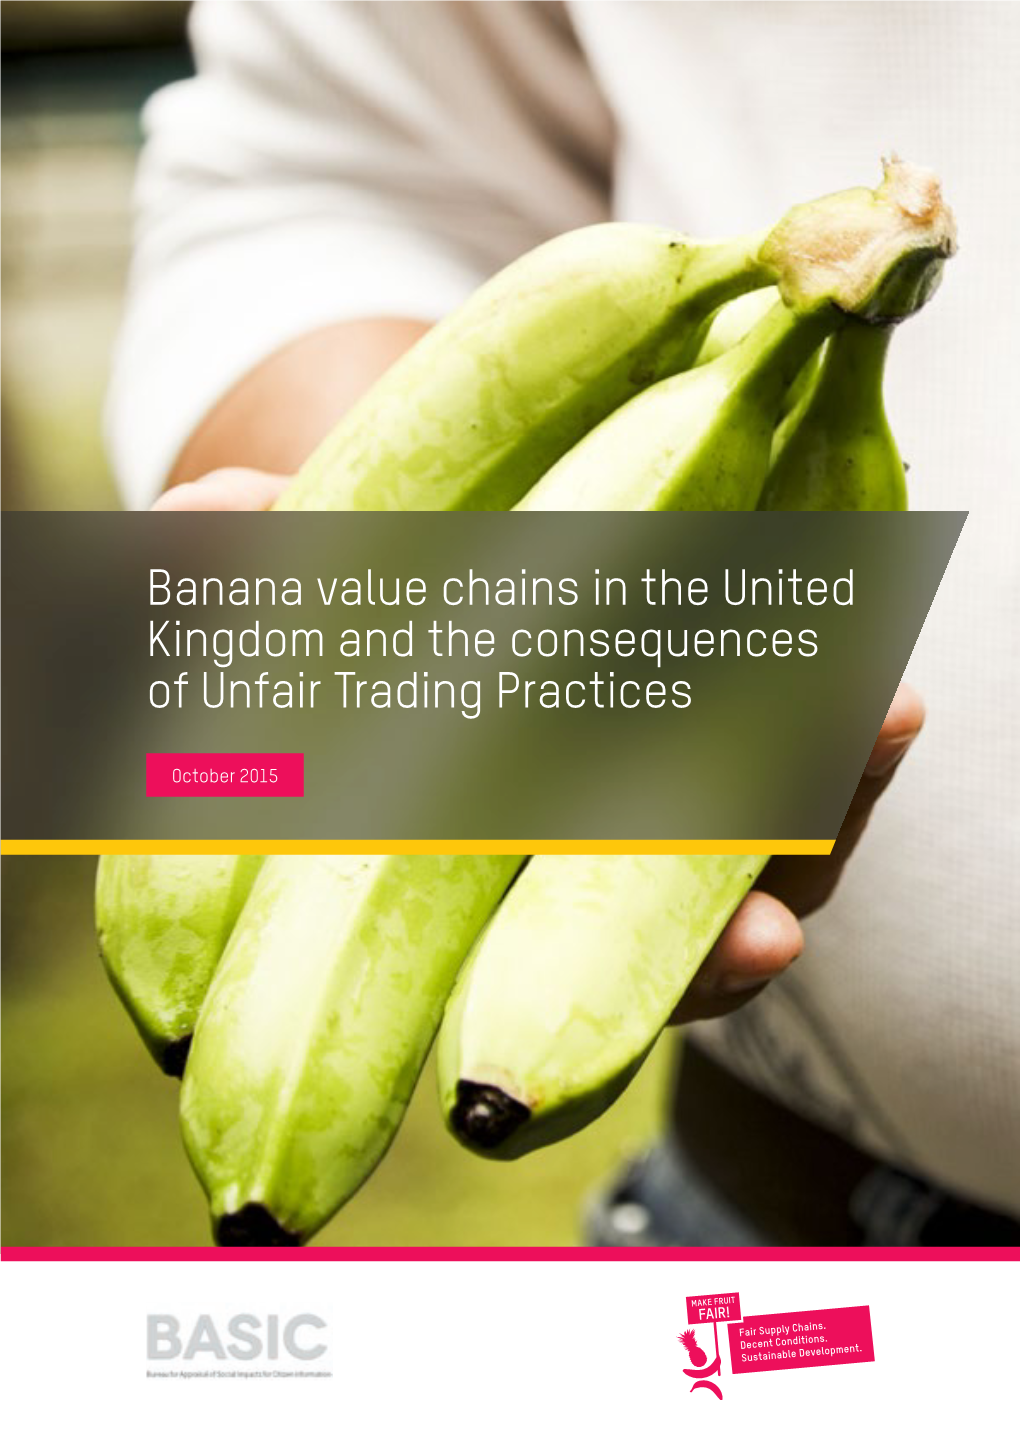 Banana Value Chains in the United Kingdom and the Consequences of Unfair Trading Practices